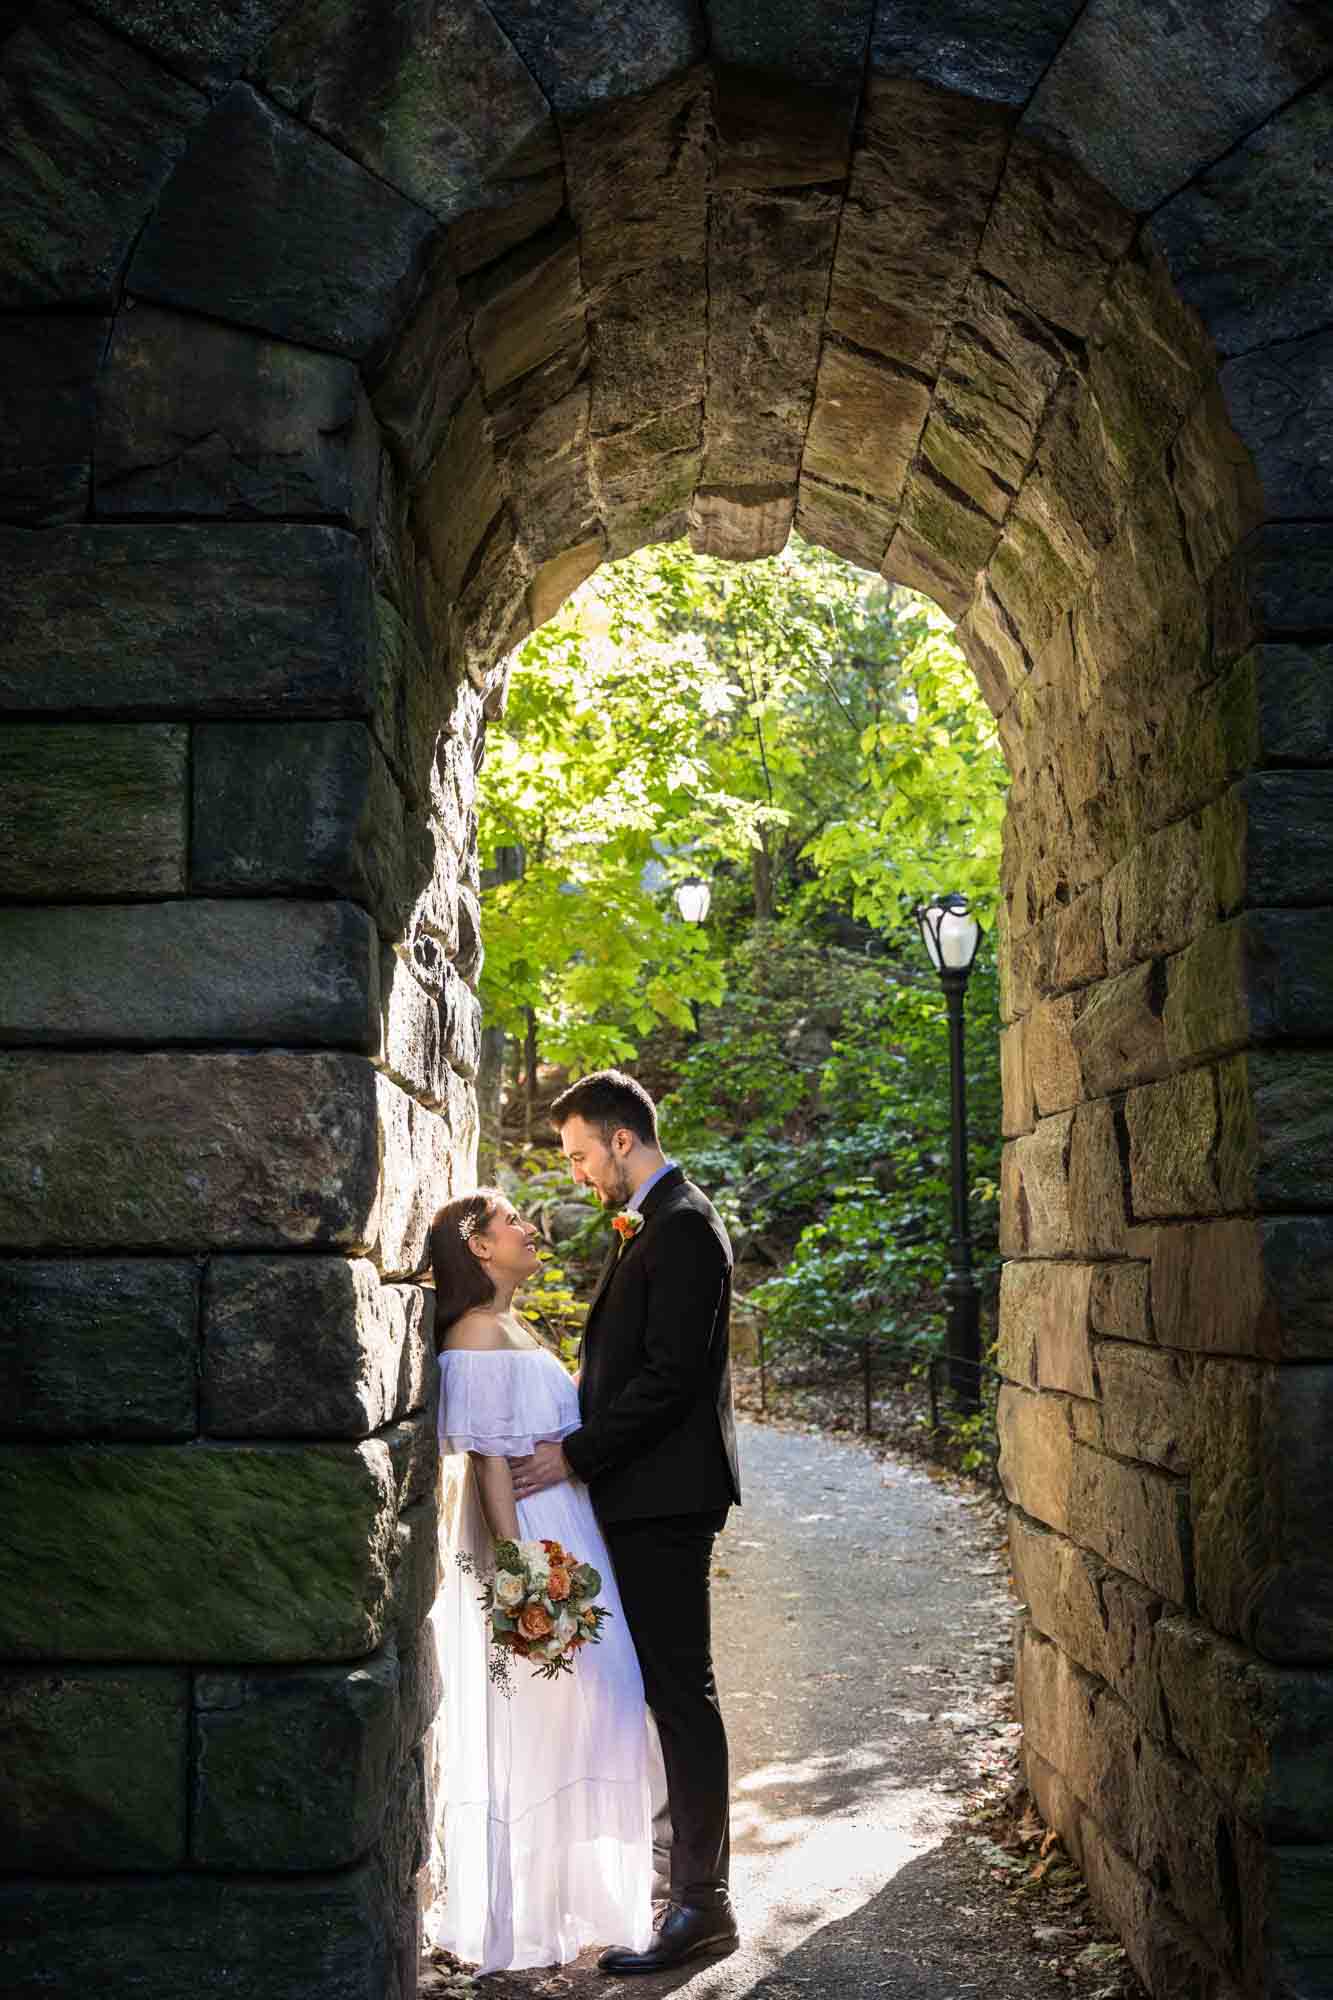 Bride and groom kissing under stone arch Article on how to elope in Central Park by NYC wedding photojournalist, Kelly Williams. Includes photos from a real wedding near Bow Bridge.